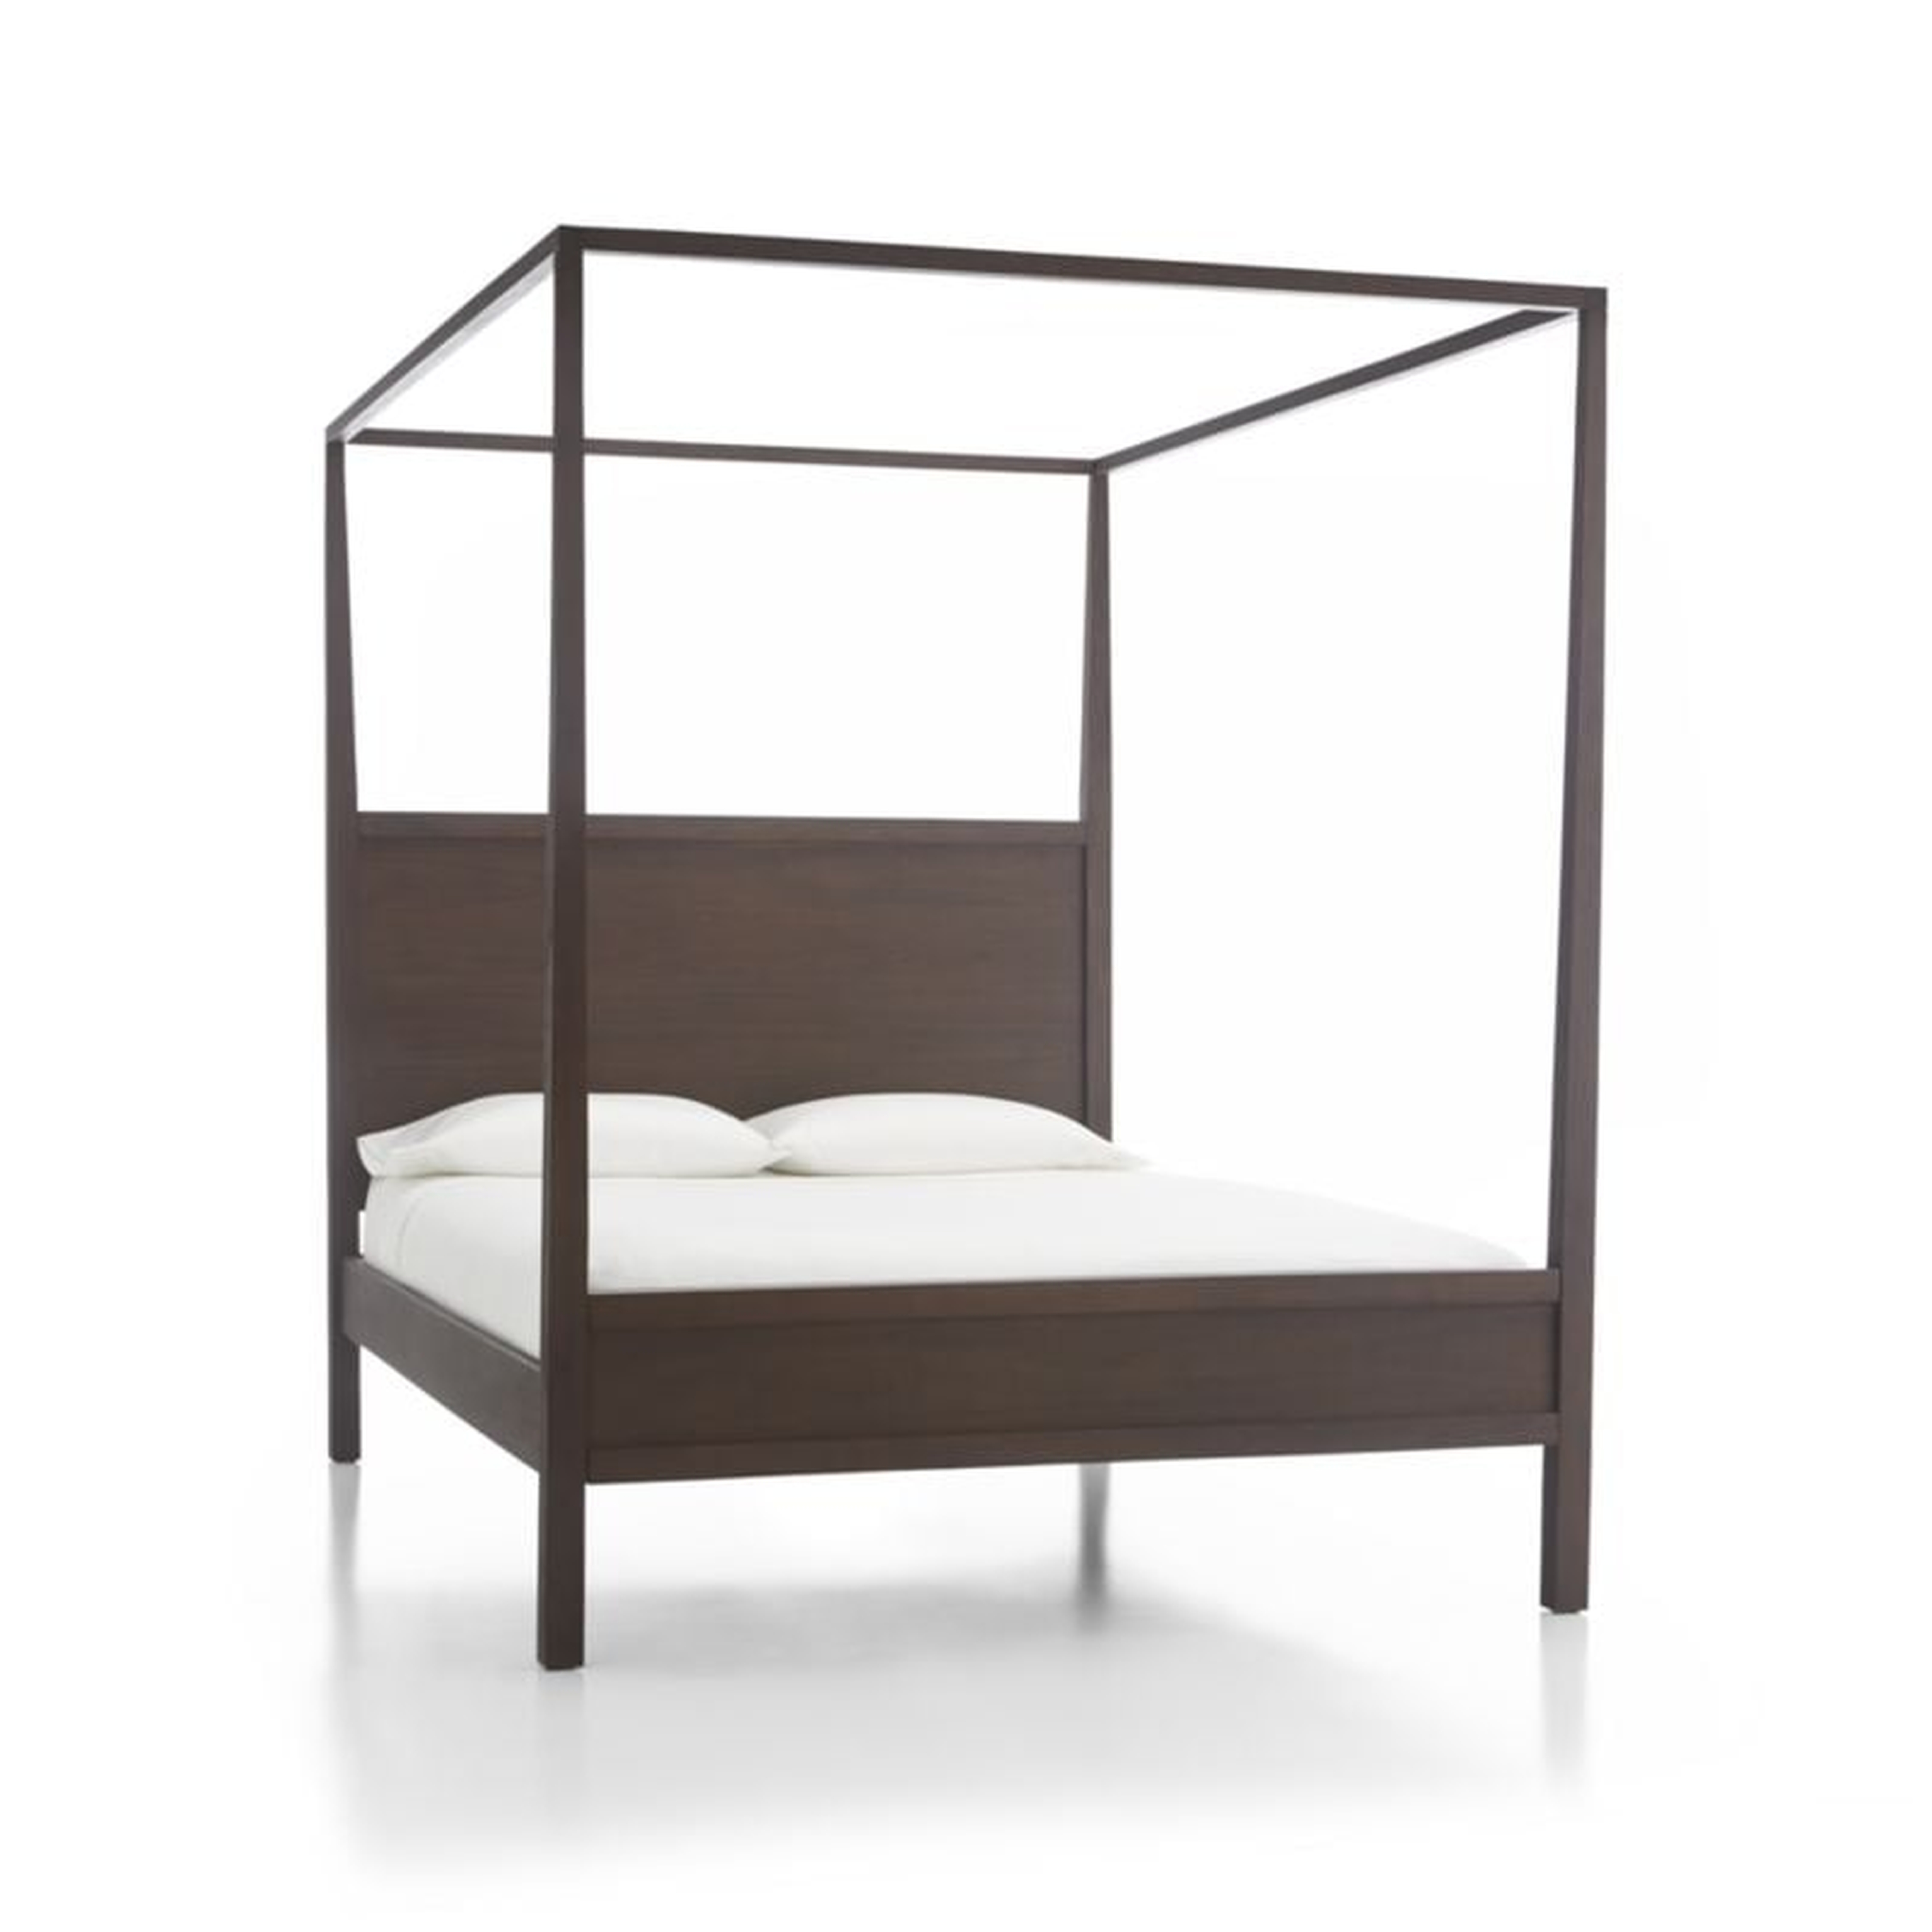 Keane Espresso Wood King Canopy Bed - Crate and Barrel